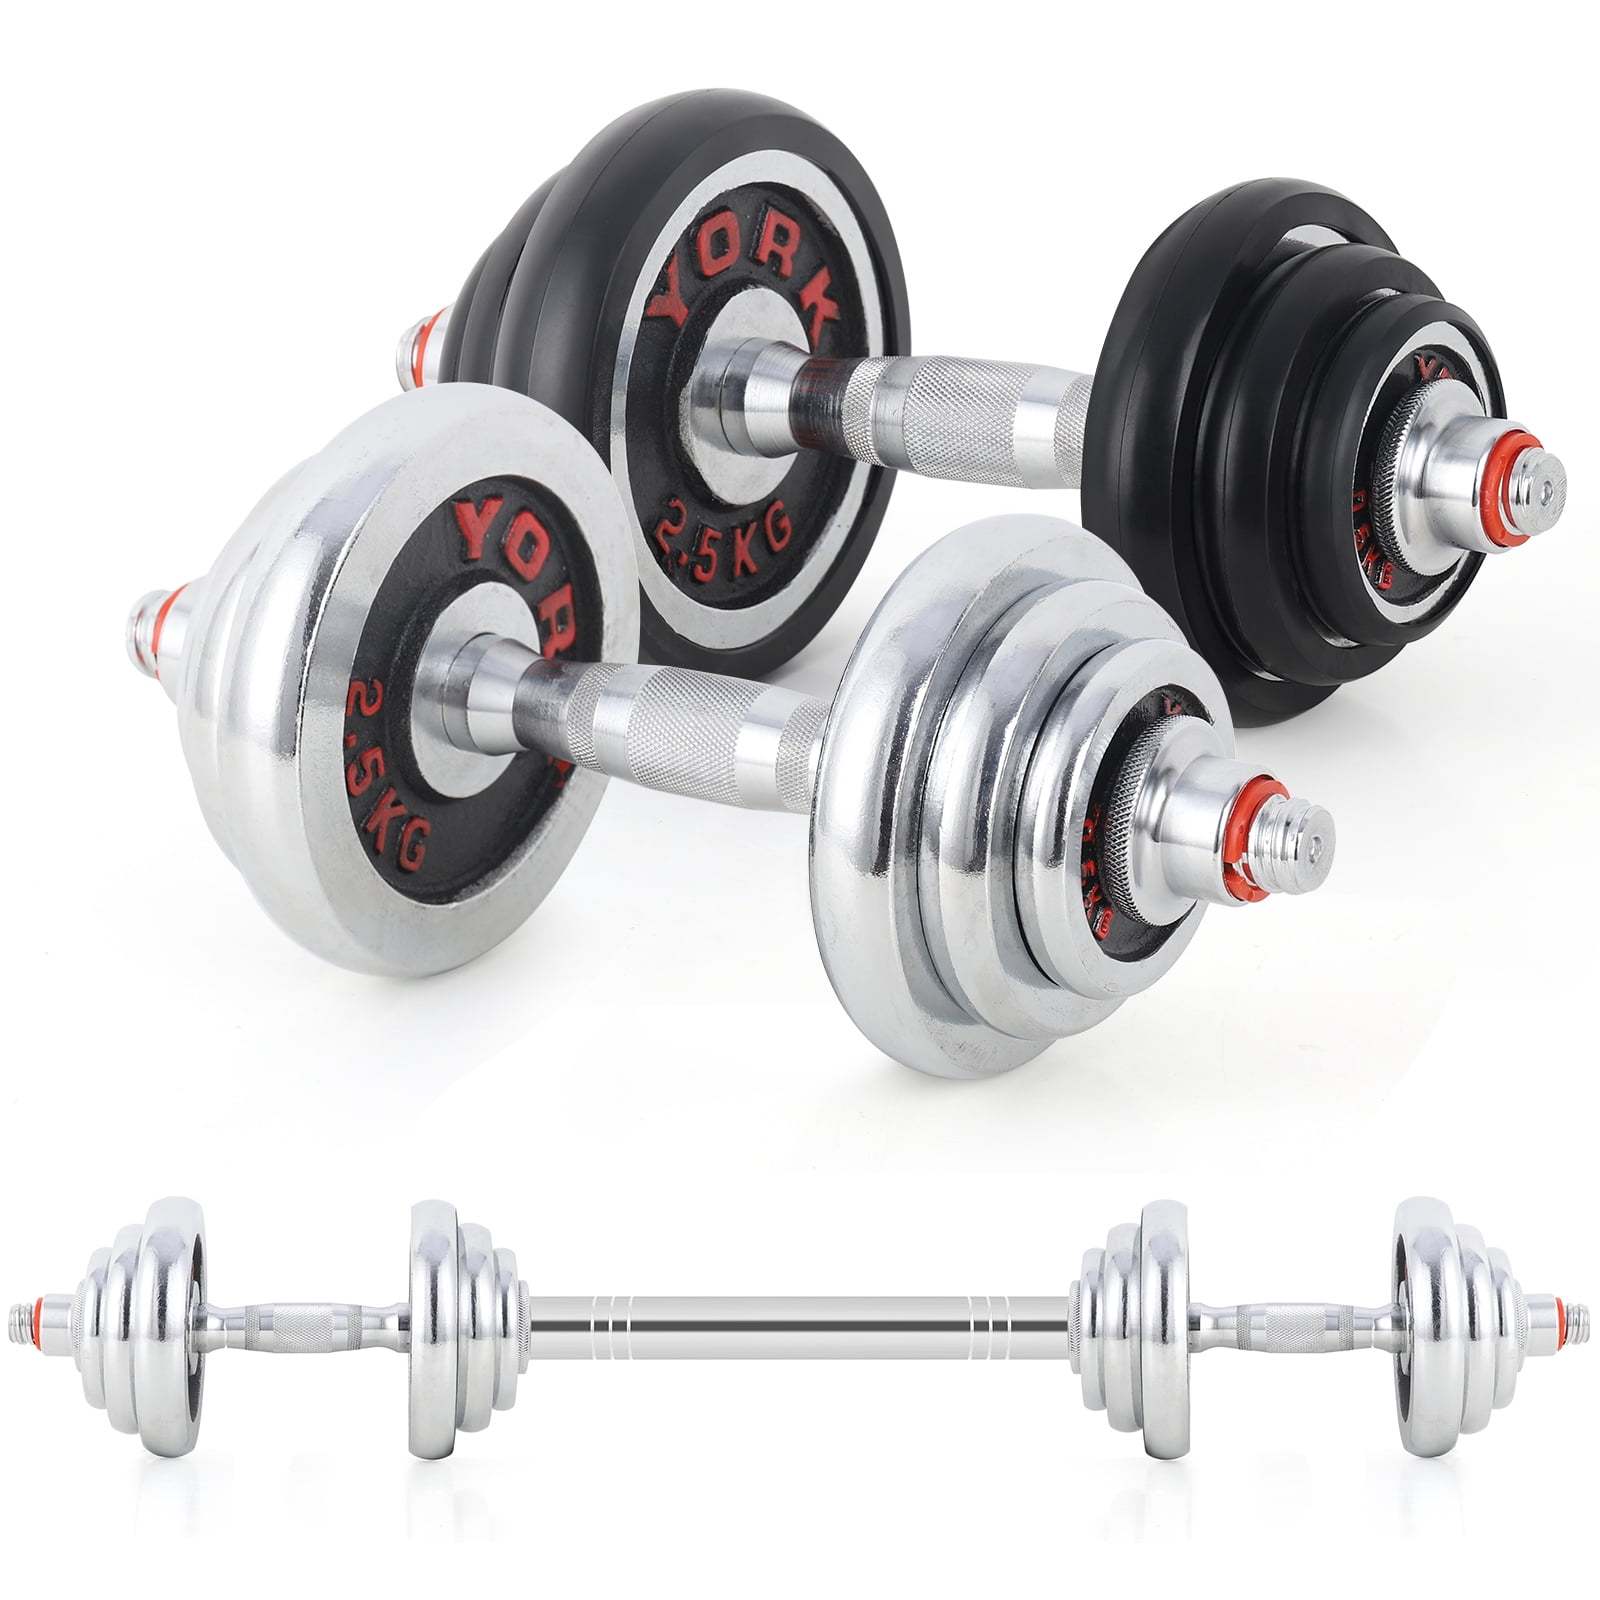 20KG Vinyl Dumbbell Set Bicep Weight Home Training Fitness Exercise Gym 44LBS 